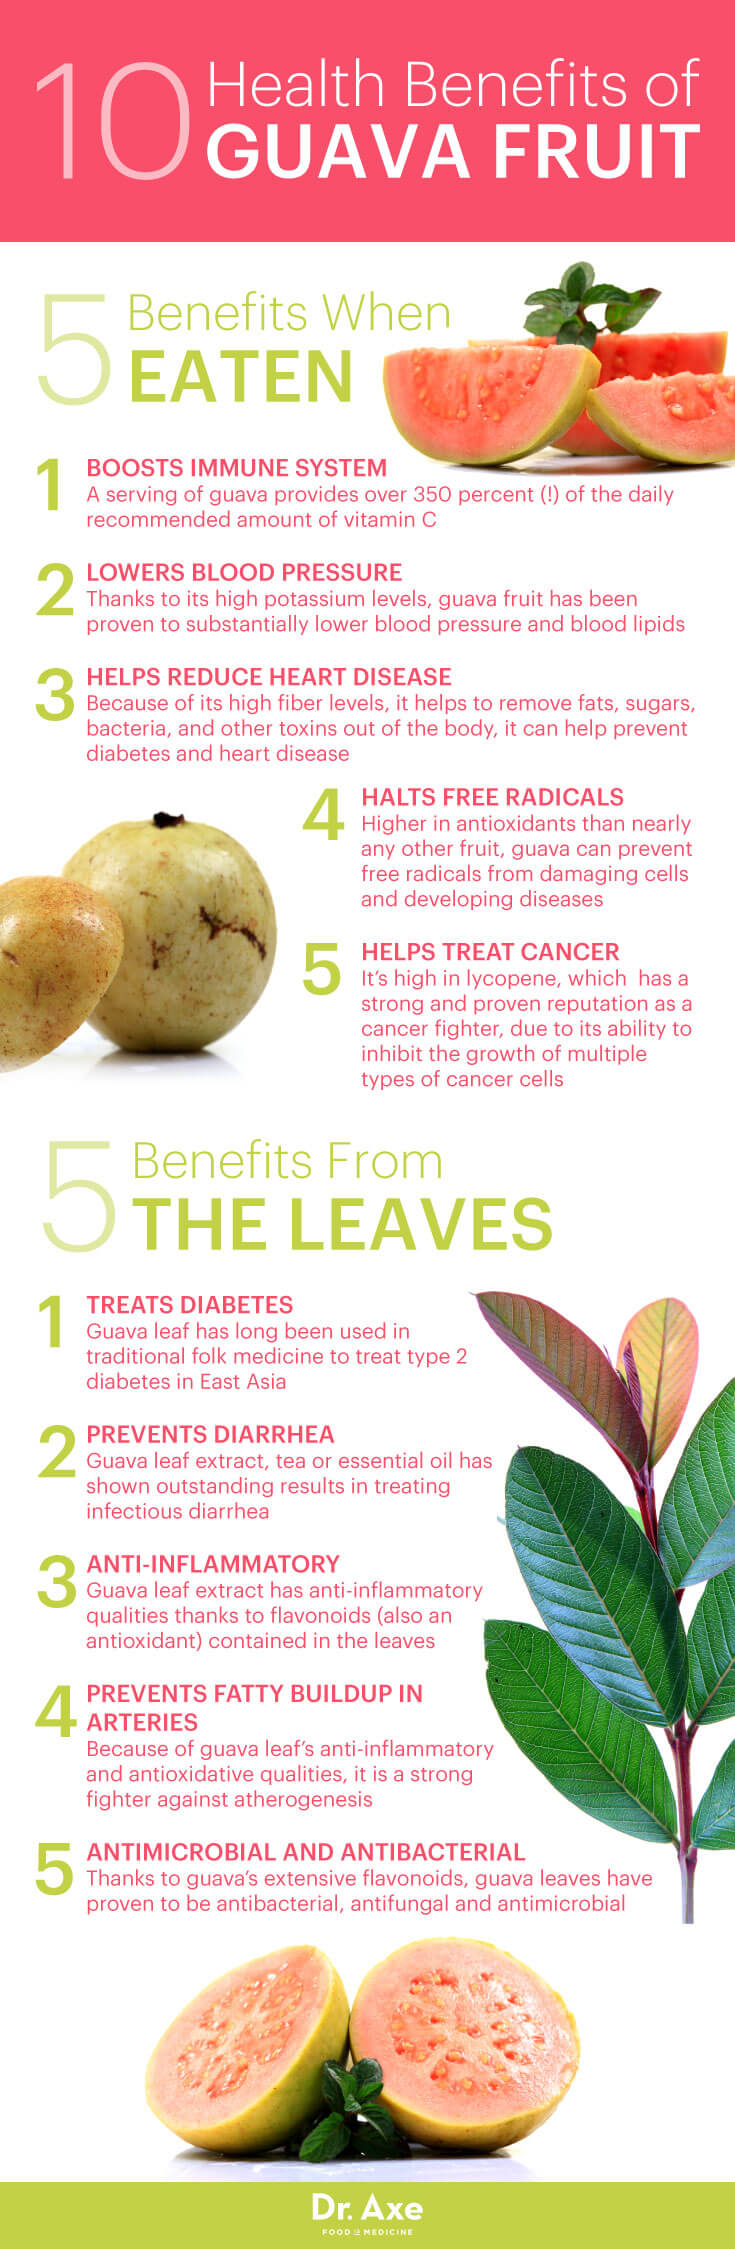 Guava: Top Antioxidant Food for the Immune System - Dr. Axe